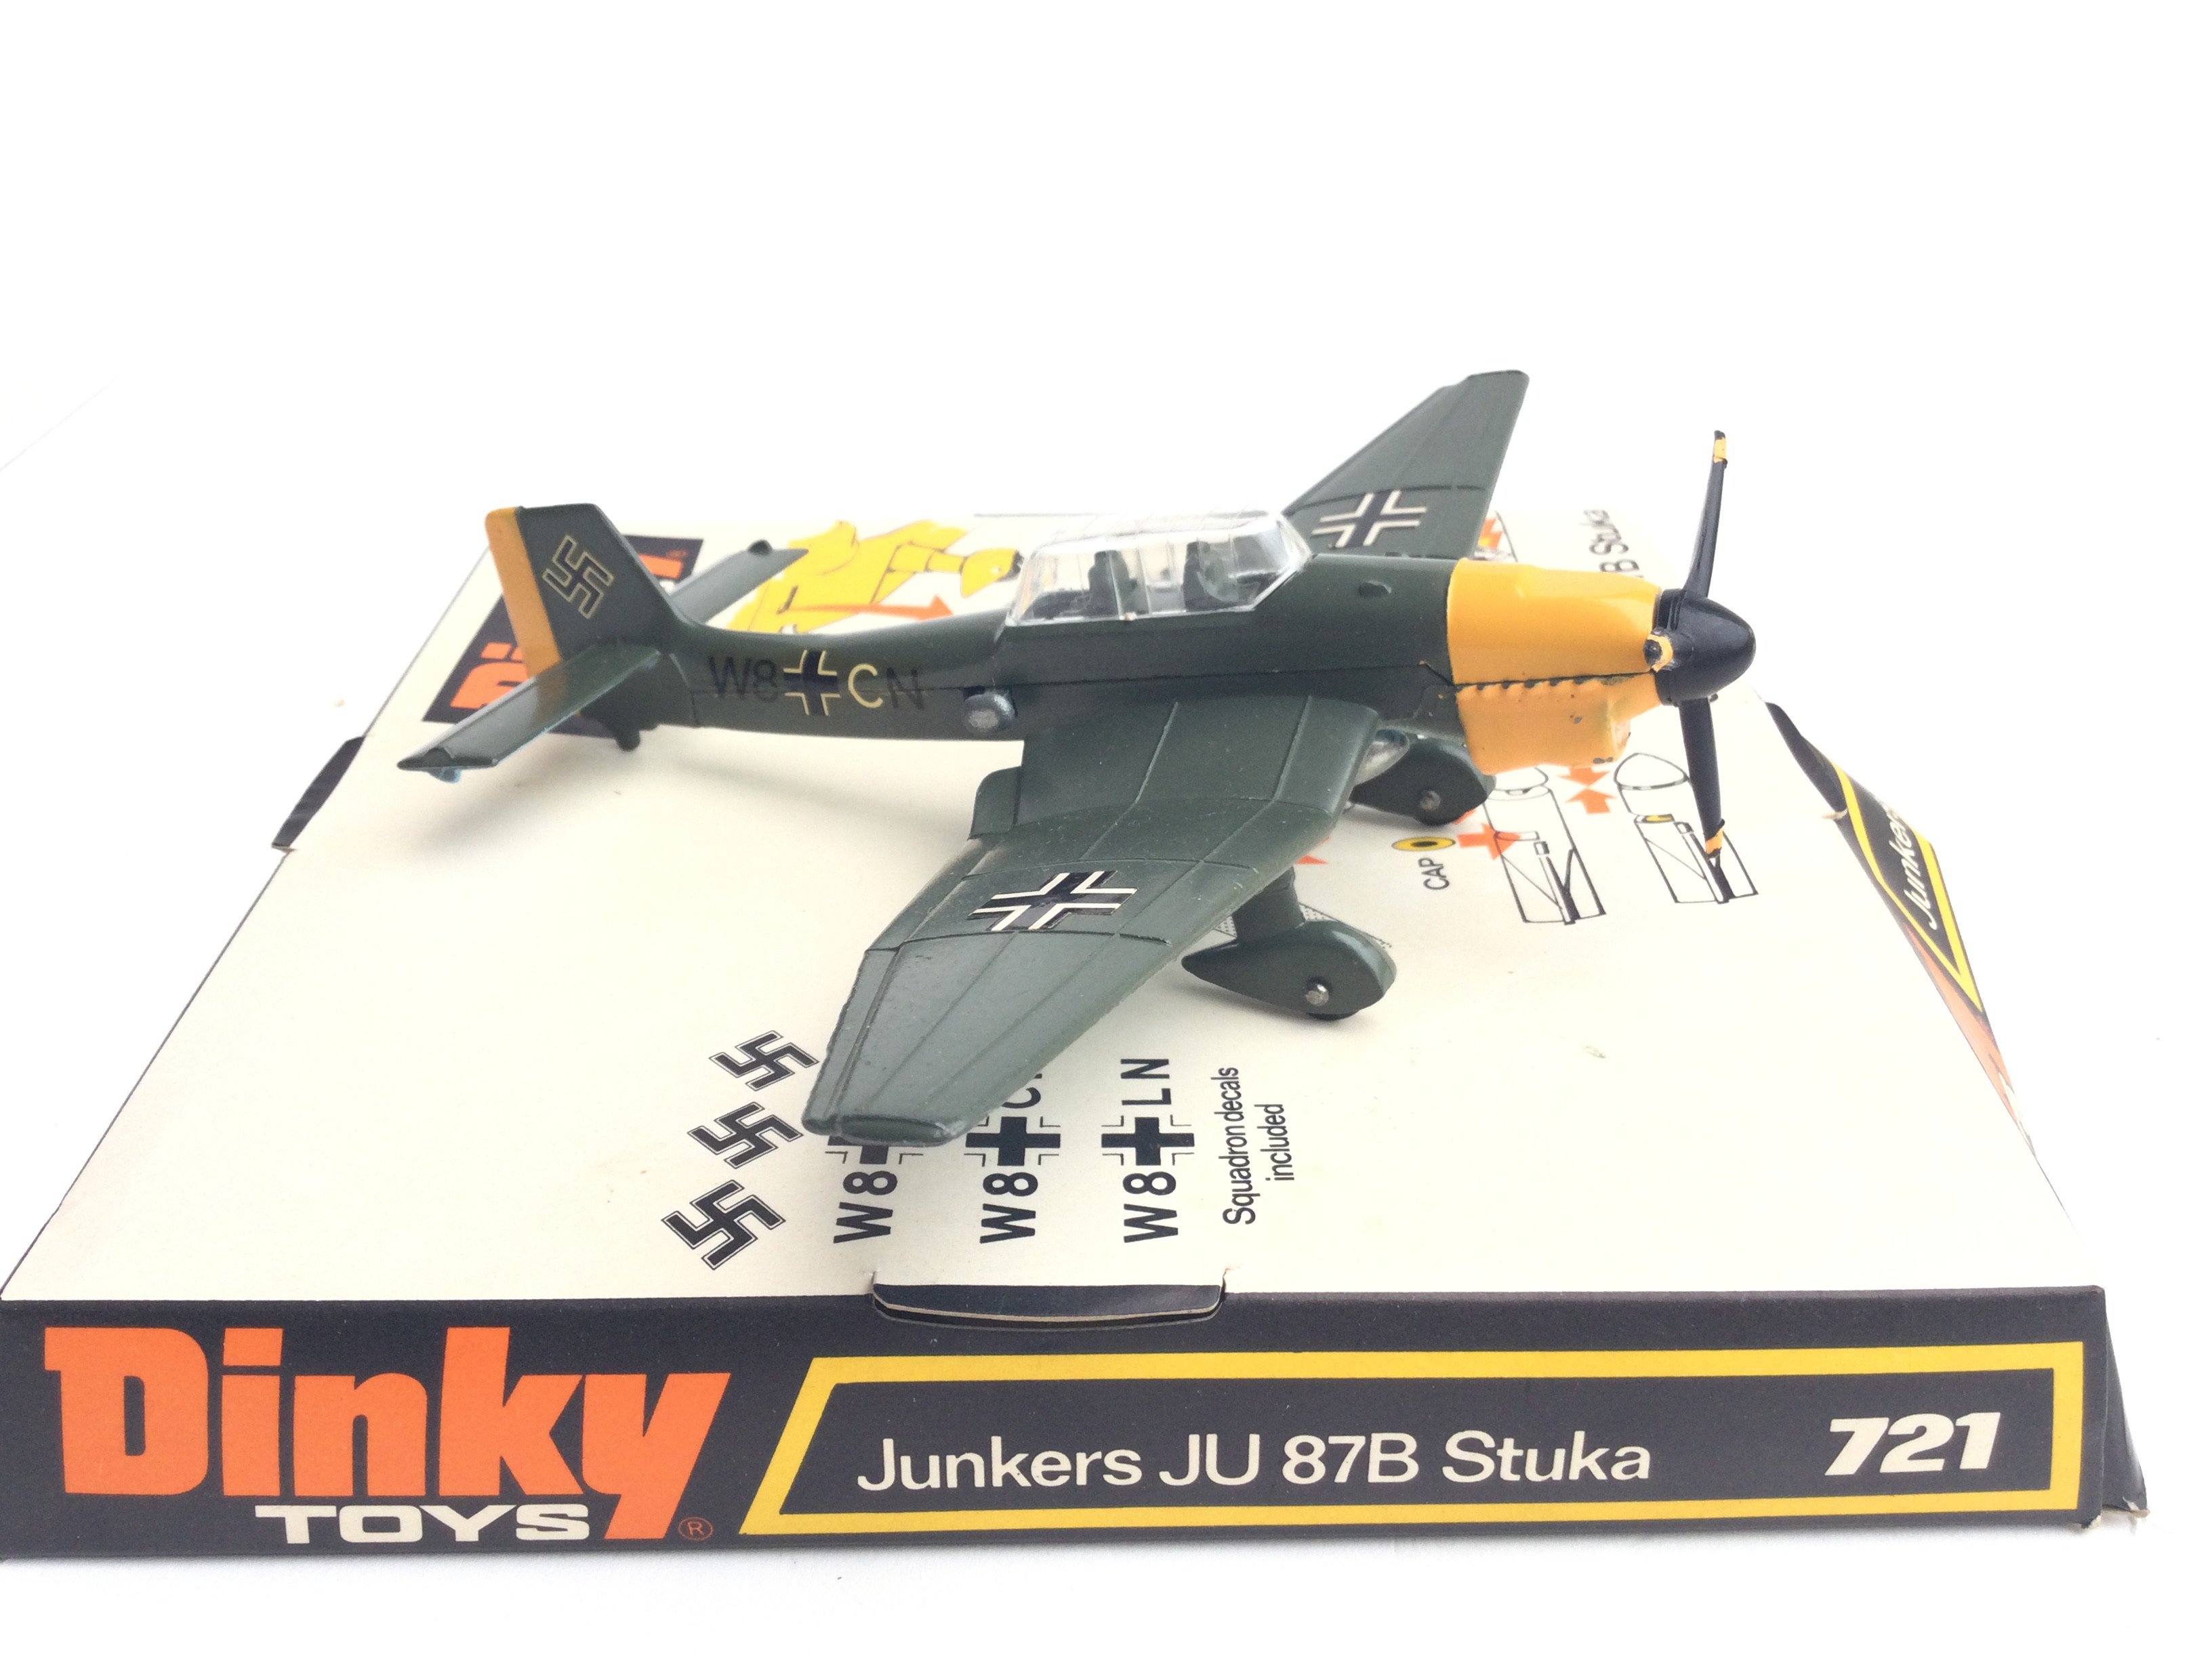 A Boxed Dinky Toys Junkers JU 87B #721. - Image 2 of 3